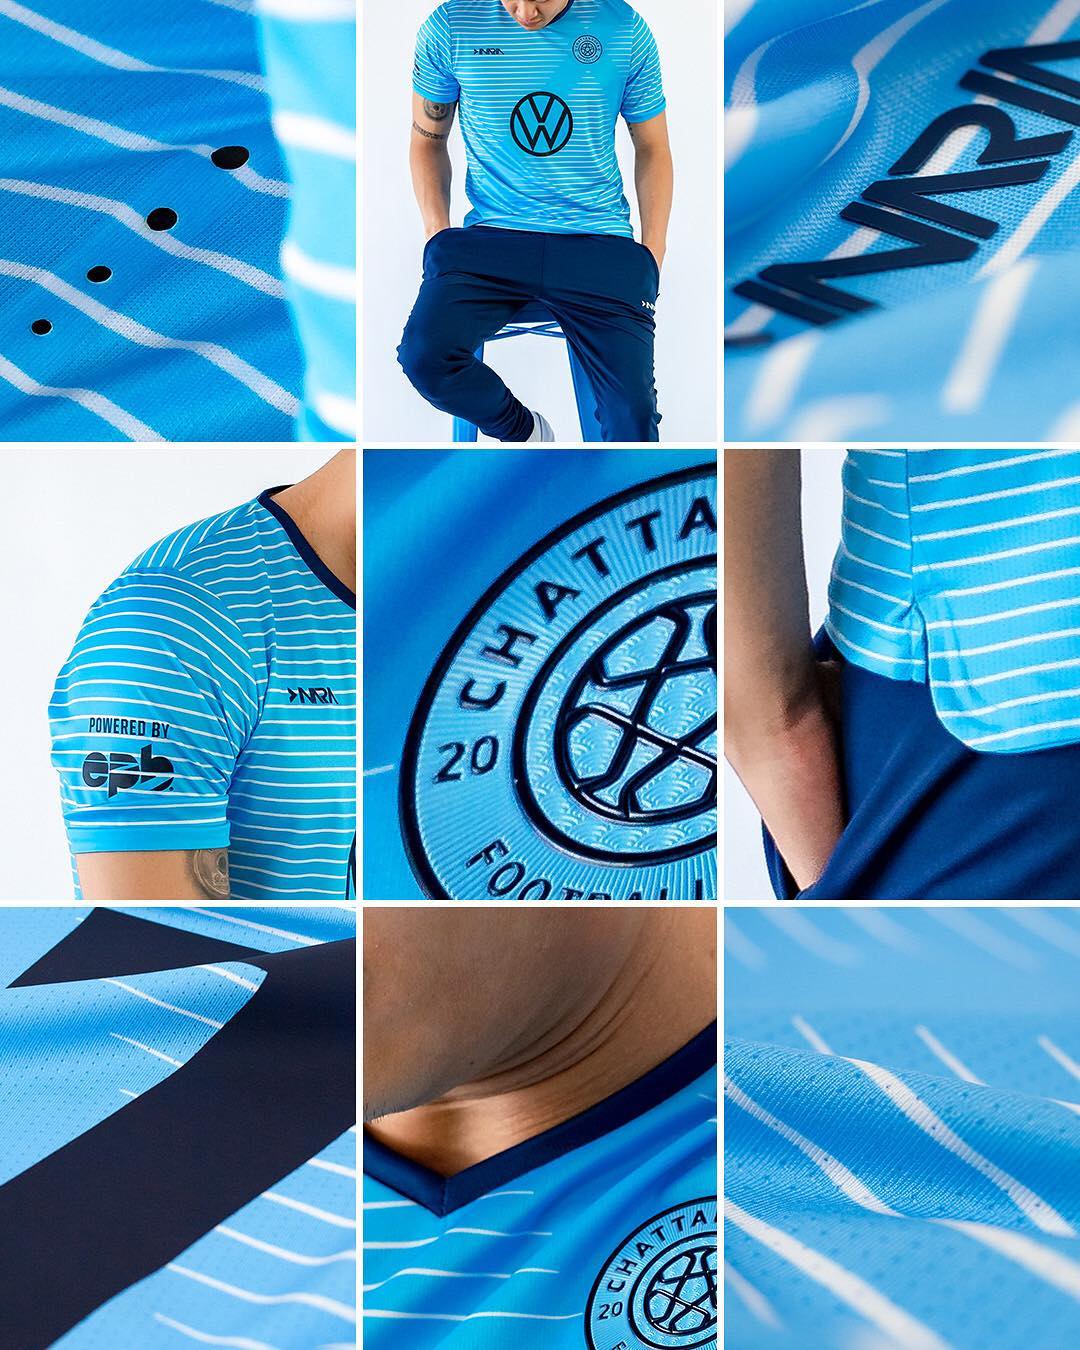 S19 kits for @chattanoogafc #inariasoccer #npsl